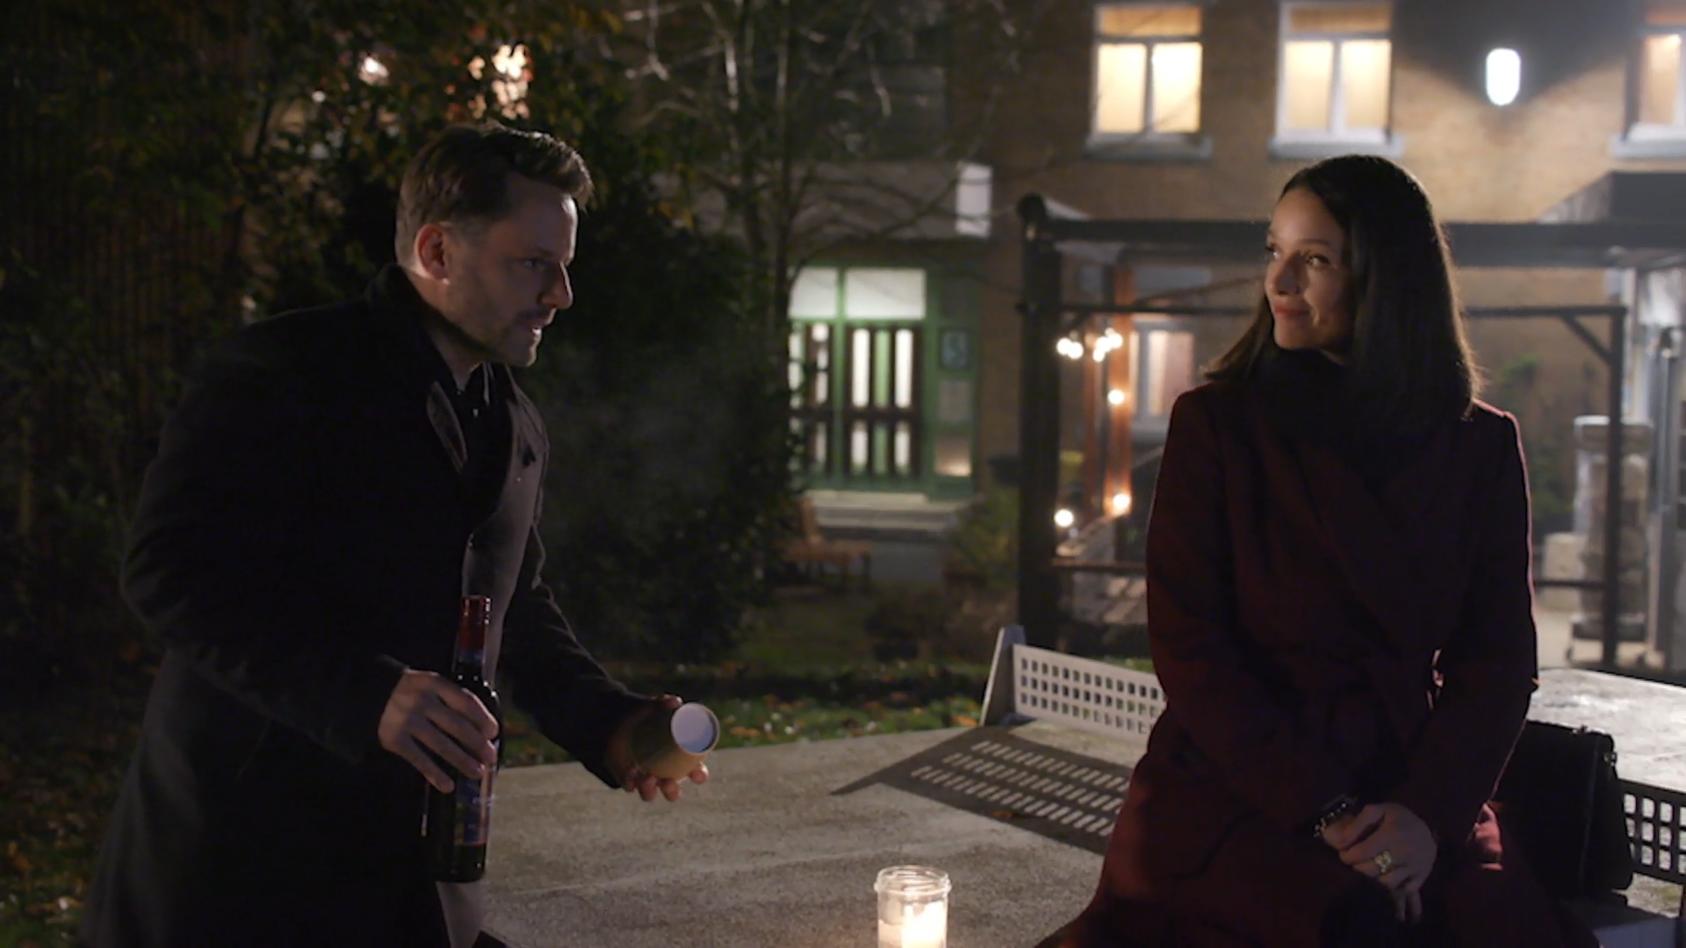 Das etwas andere Candle-Light-Date AWZ-Folge vom 31.01.22